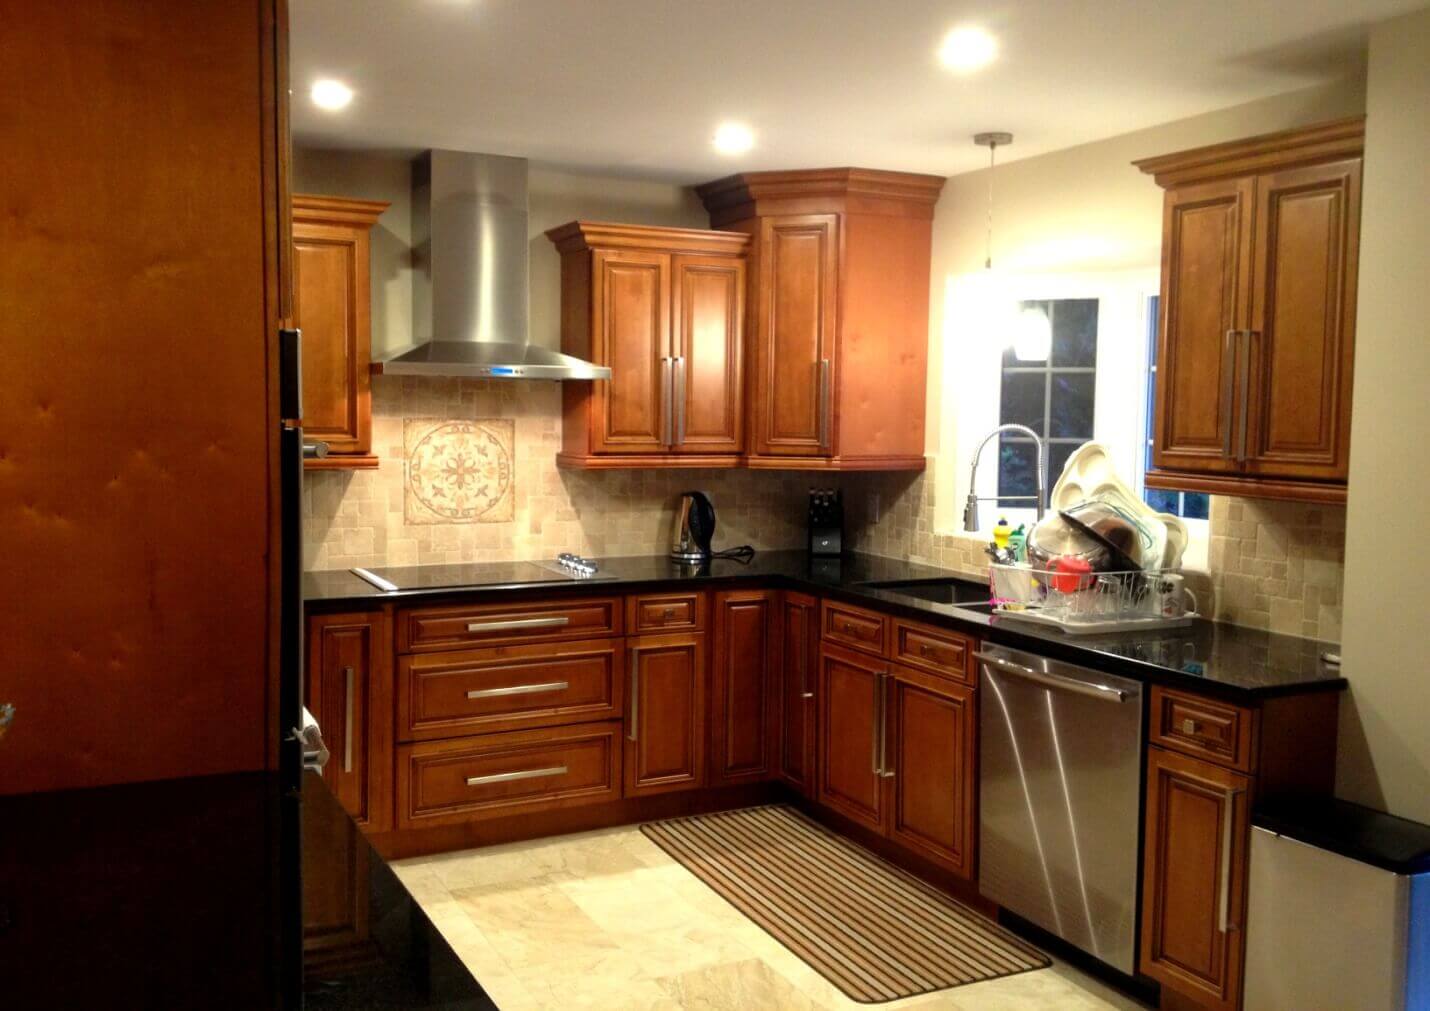 3 Specialties of Walnut Kitchen Cabinets | All blogroll - The